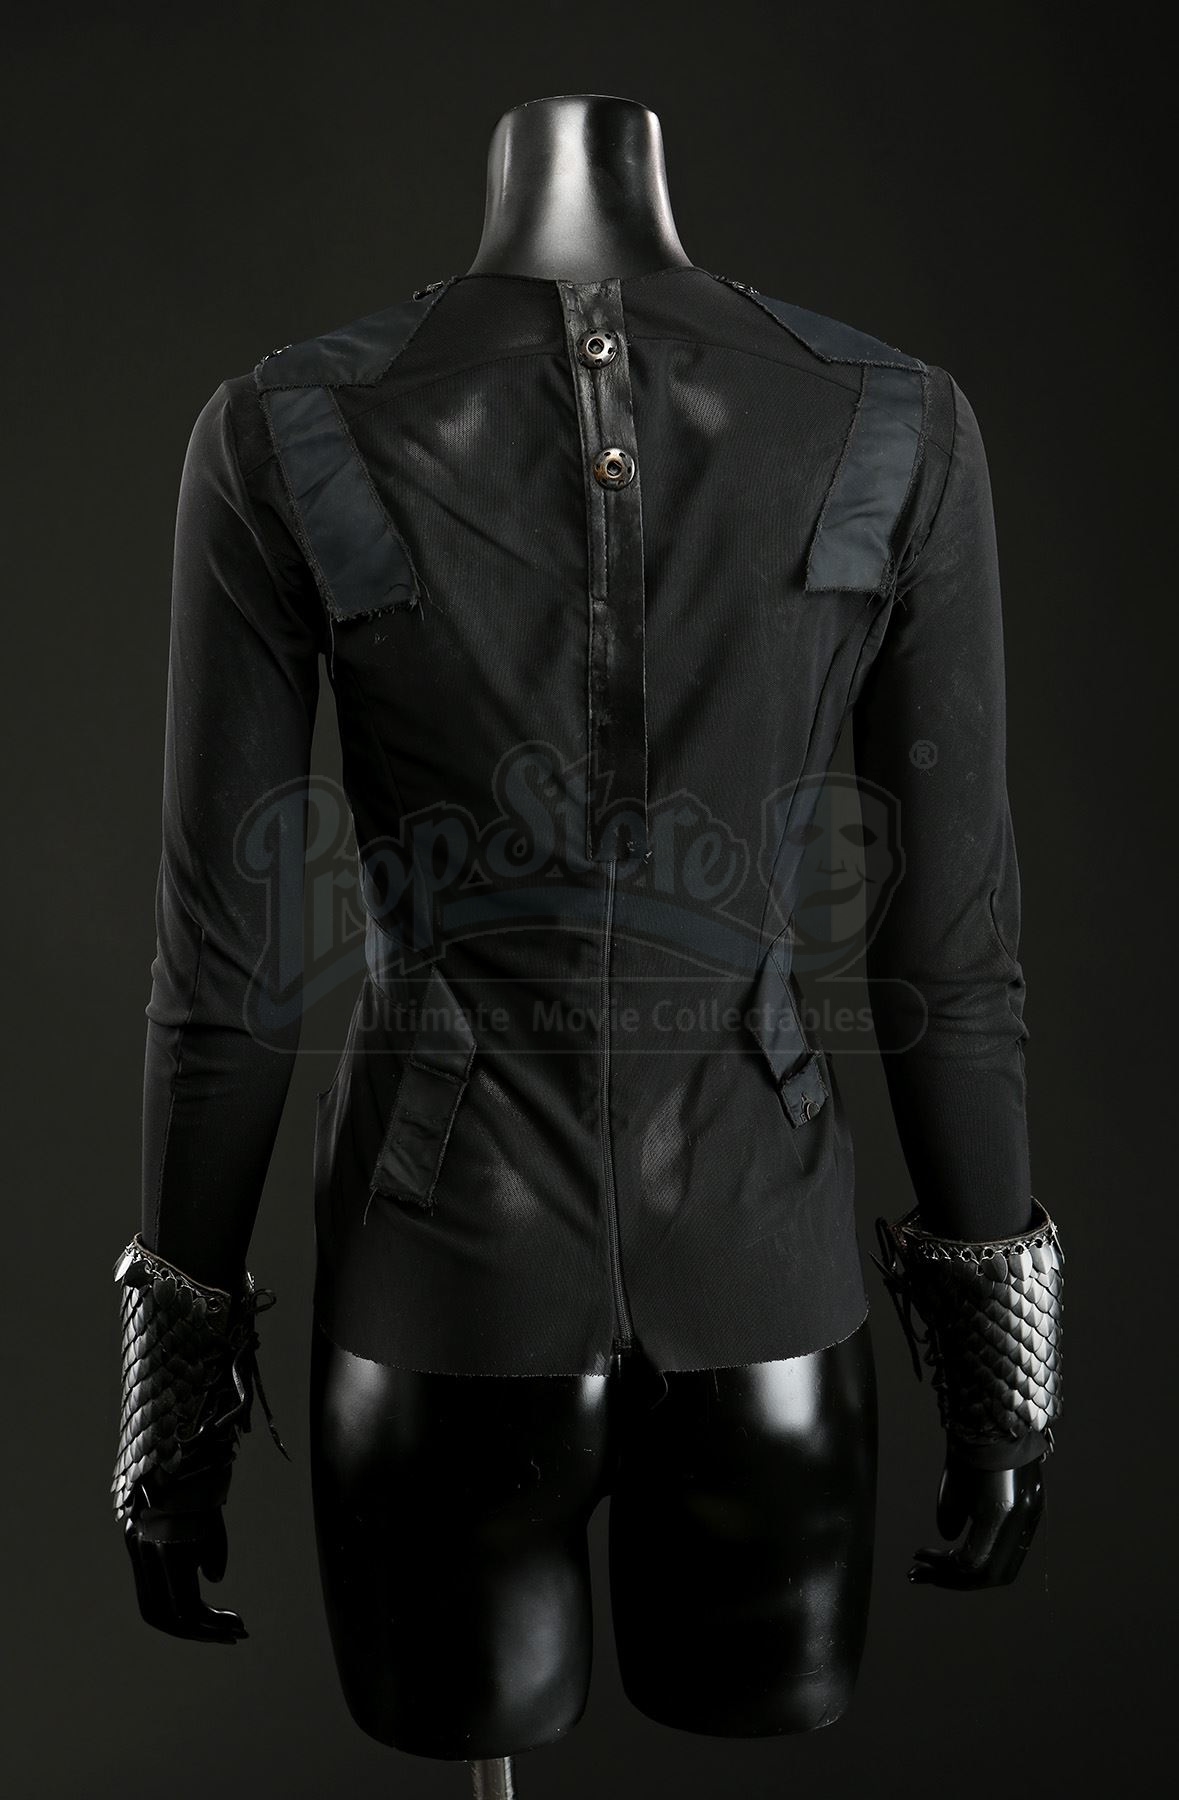 Mother Malkin's (Julianne Moore) Blouse, Gauntlets, and Shoes - Current ...